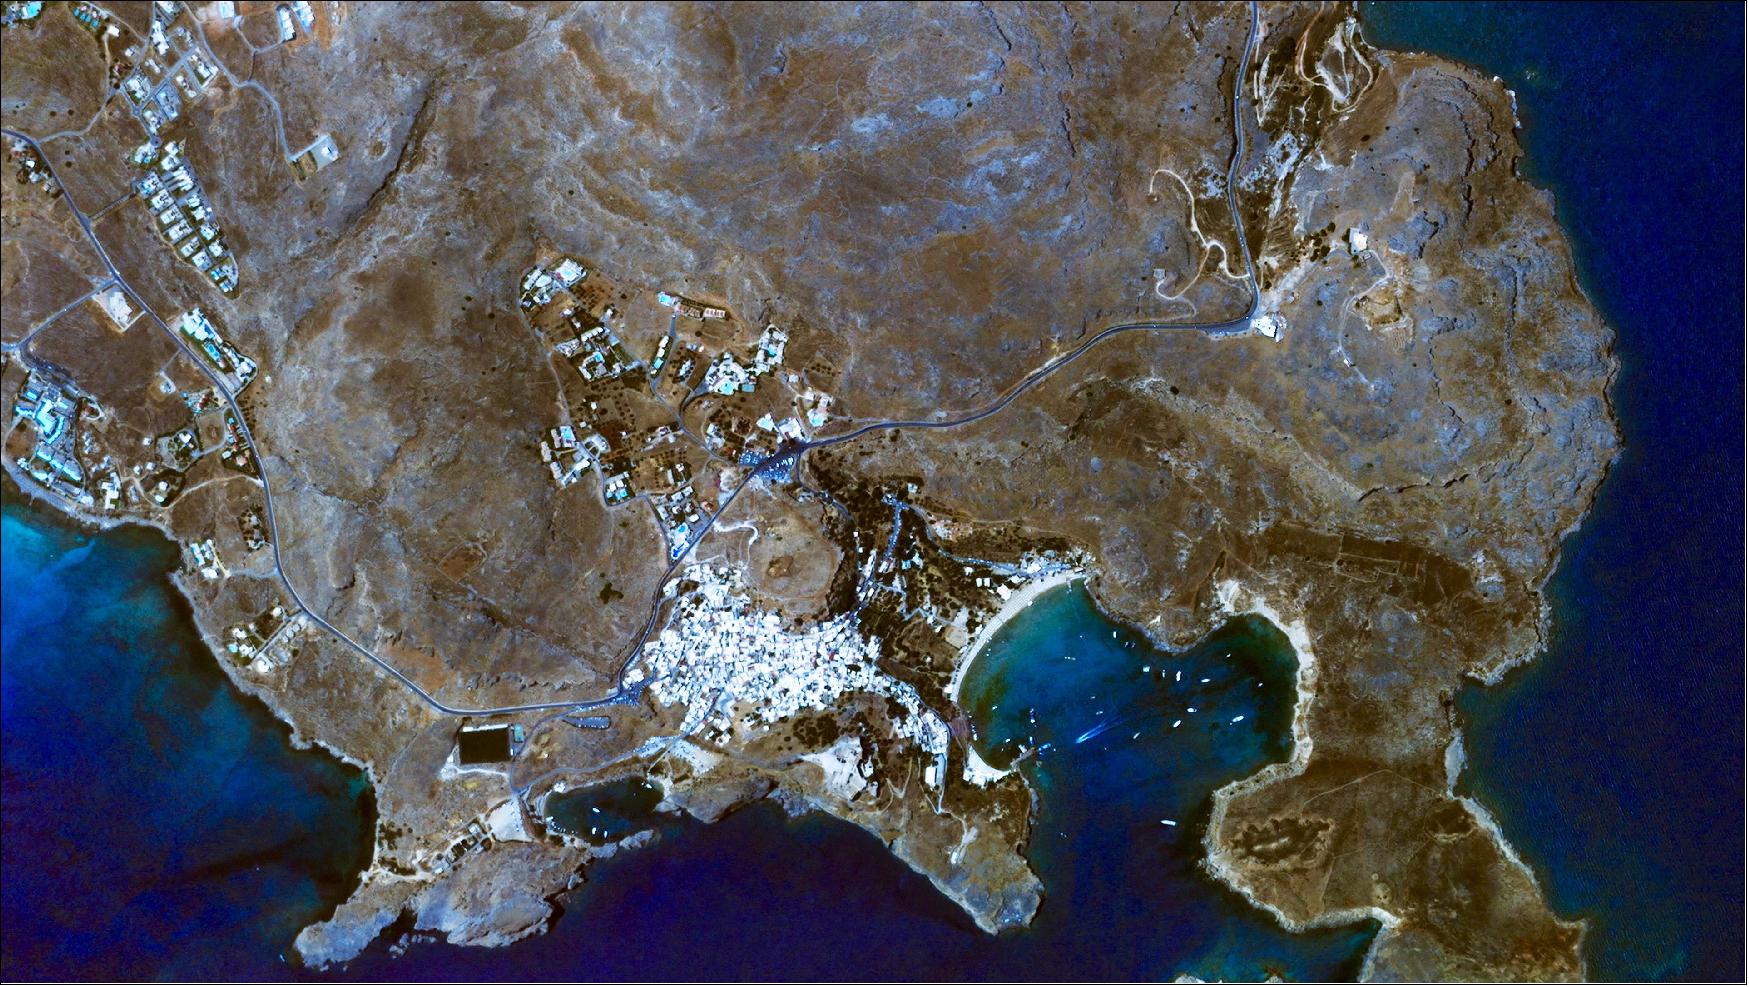 Figure 6: The Iris video shows part of the Island of Rhodos along with the Acropolis of Lindos archeological site. A waterskier can be seen in the lagoon (bottom right) being towed by a speedboat (image credit: UrtheCast)